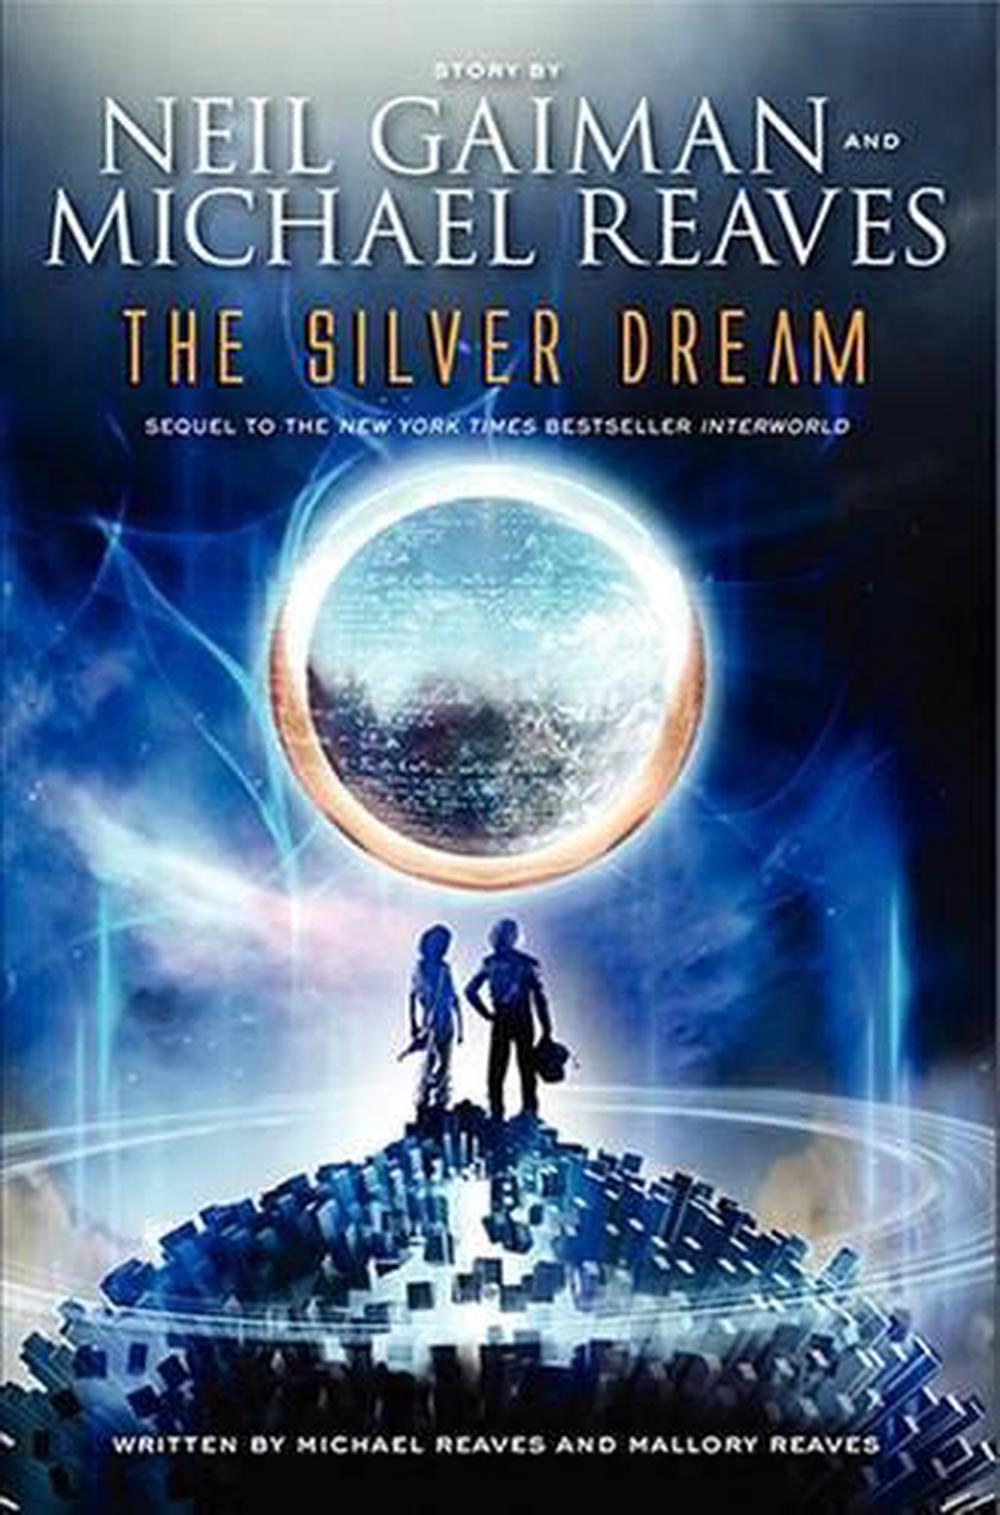 The Silver Dream by Neil Gaiman (English) Hardcover Book Free Shipping